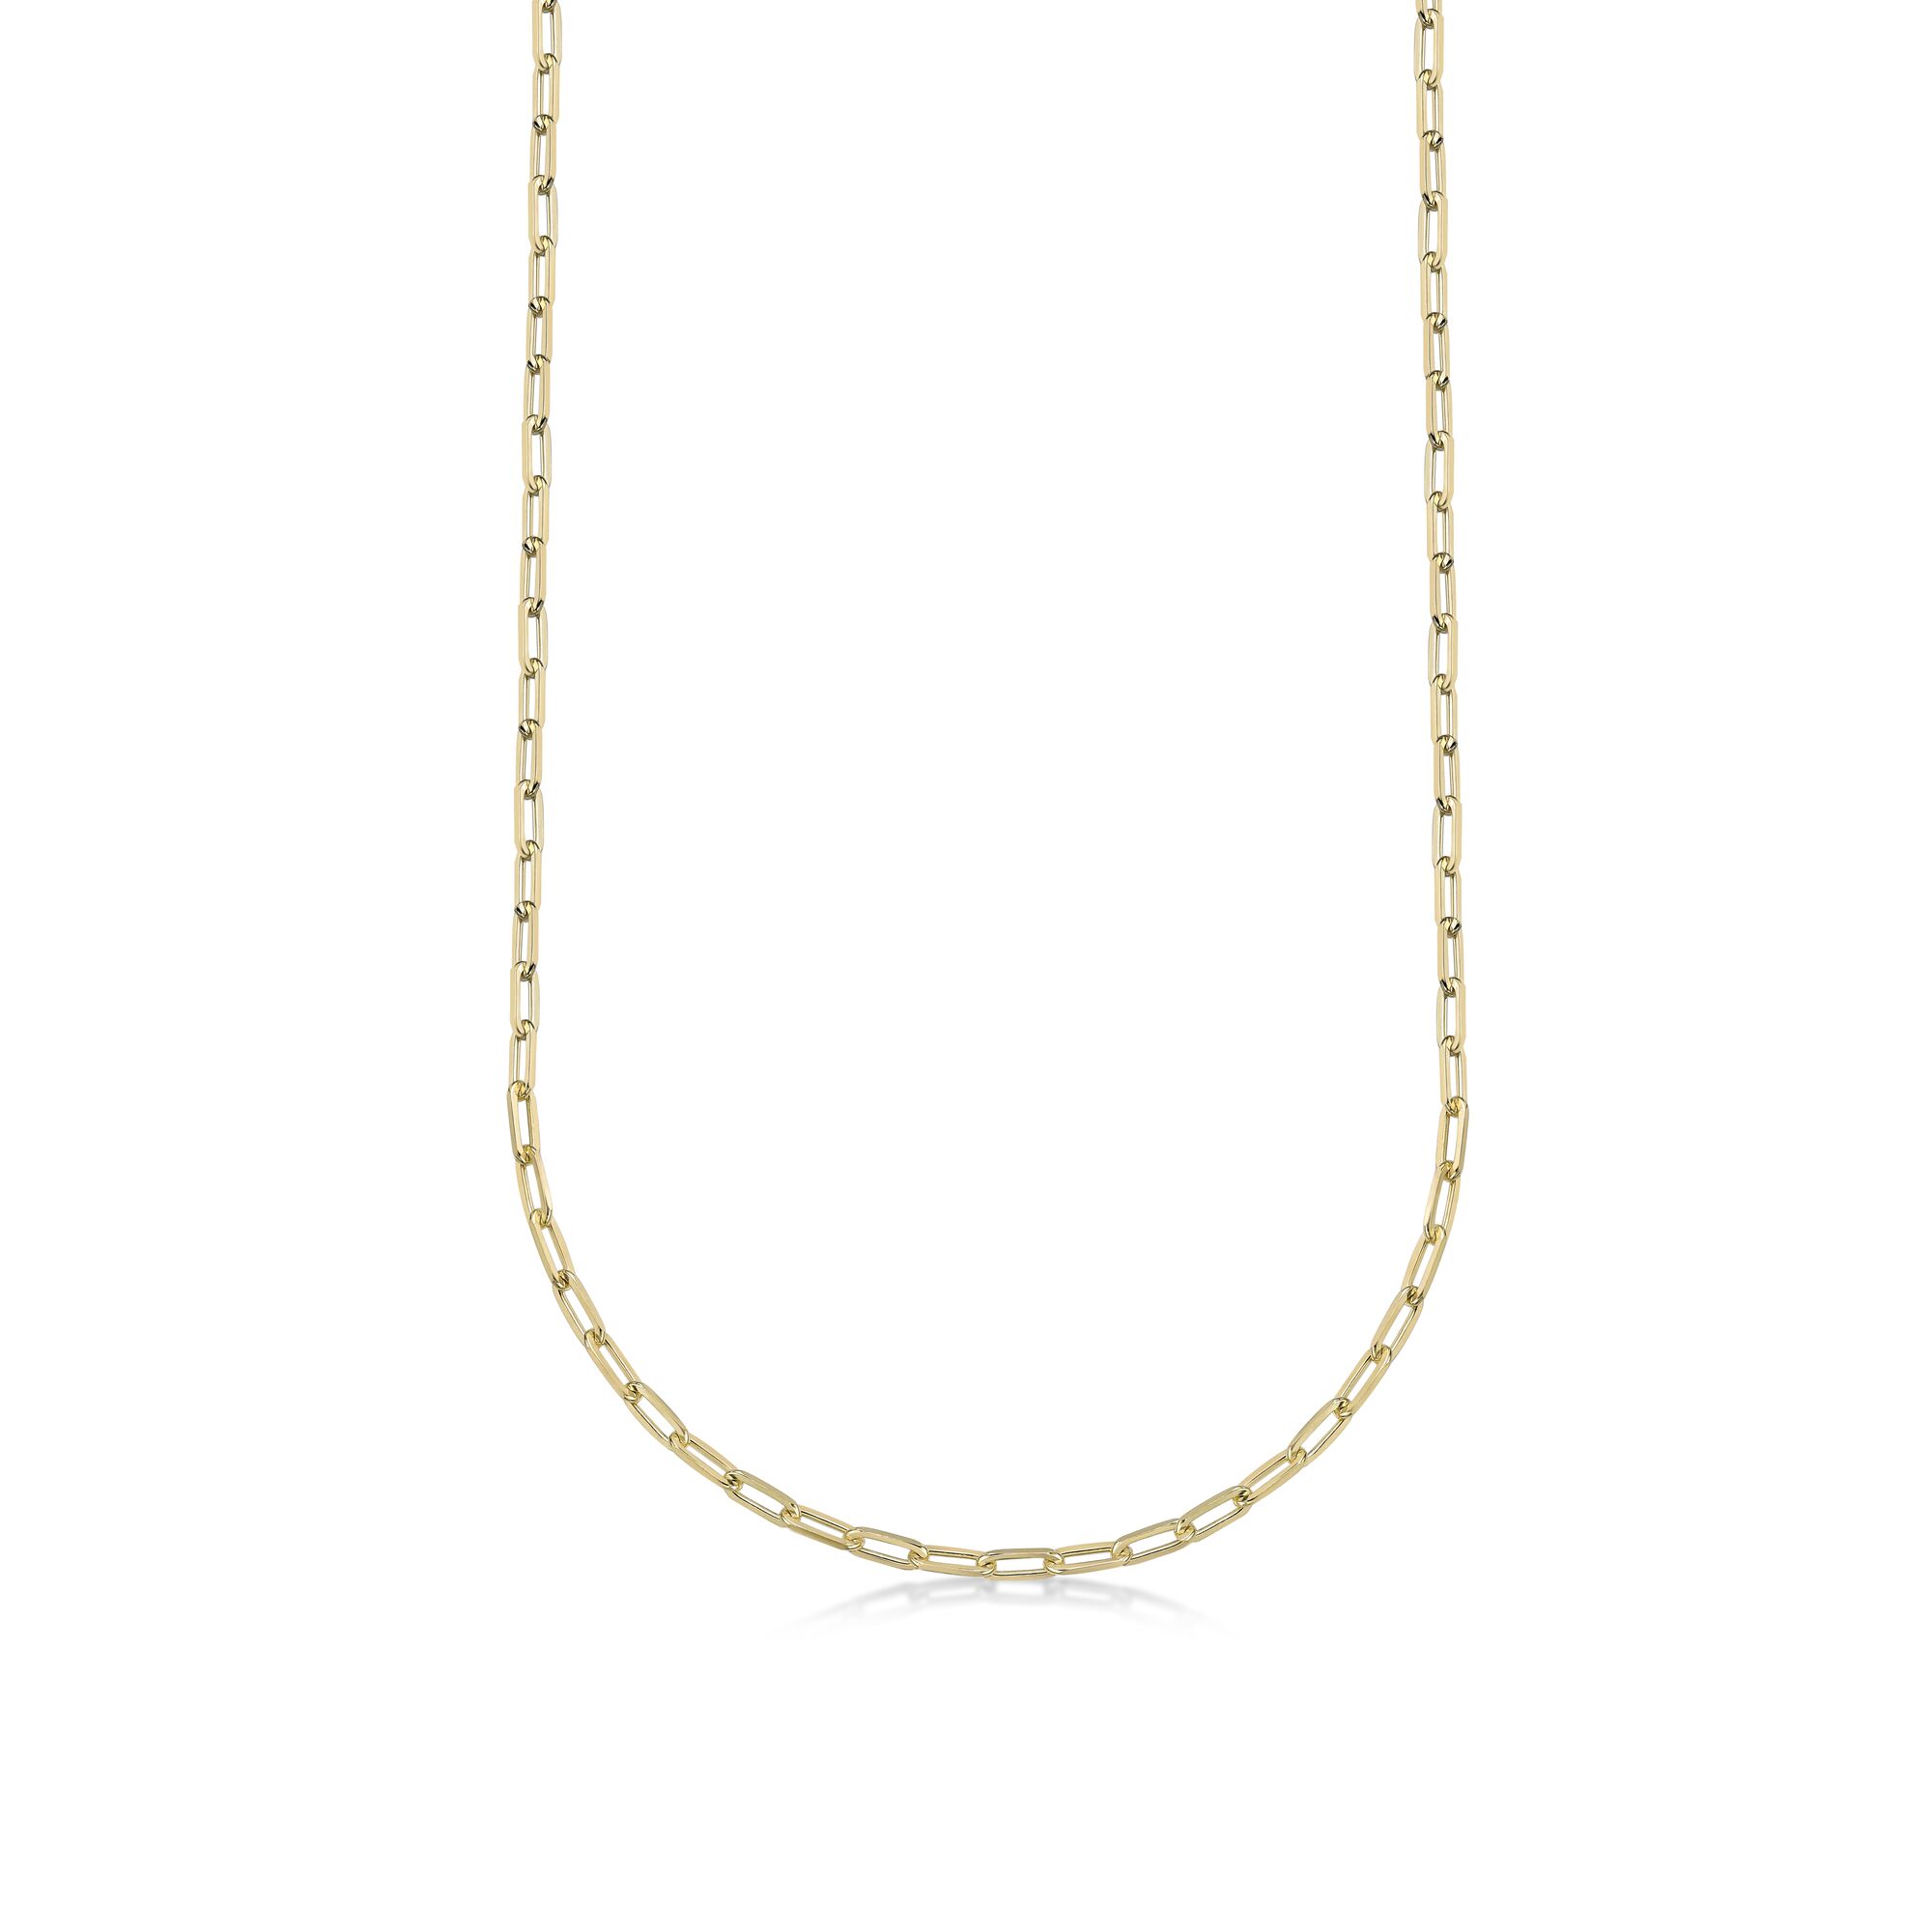 Lavari Jewelers 3.5 MM Paper Clip Link Chain Necklace, Yellow Gold Plating 925 Sterling Silver, 16 Inches